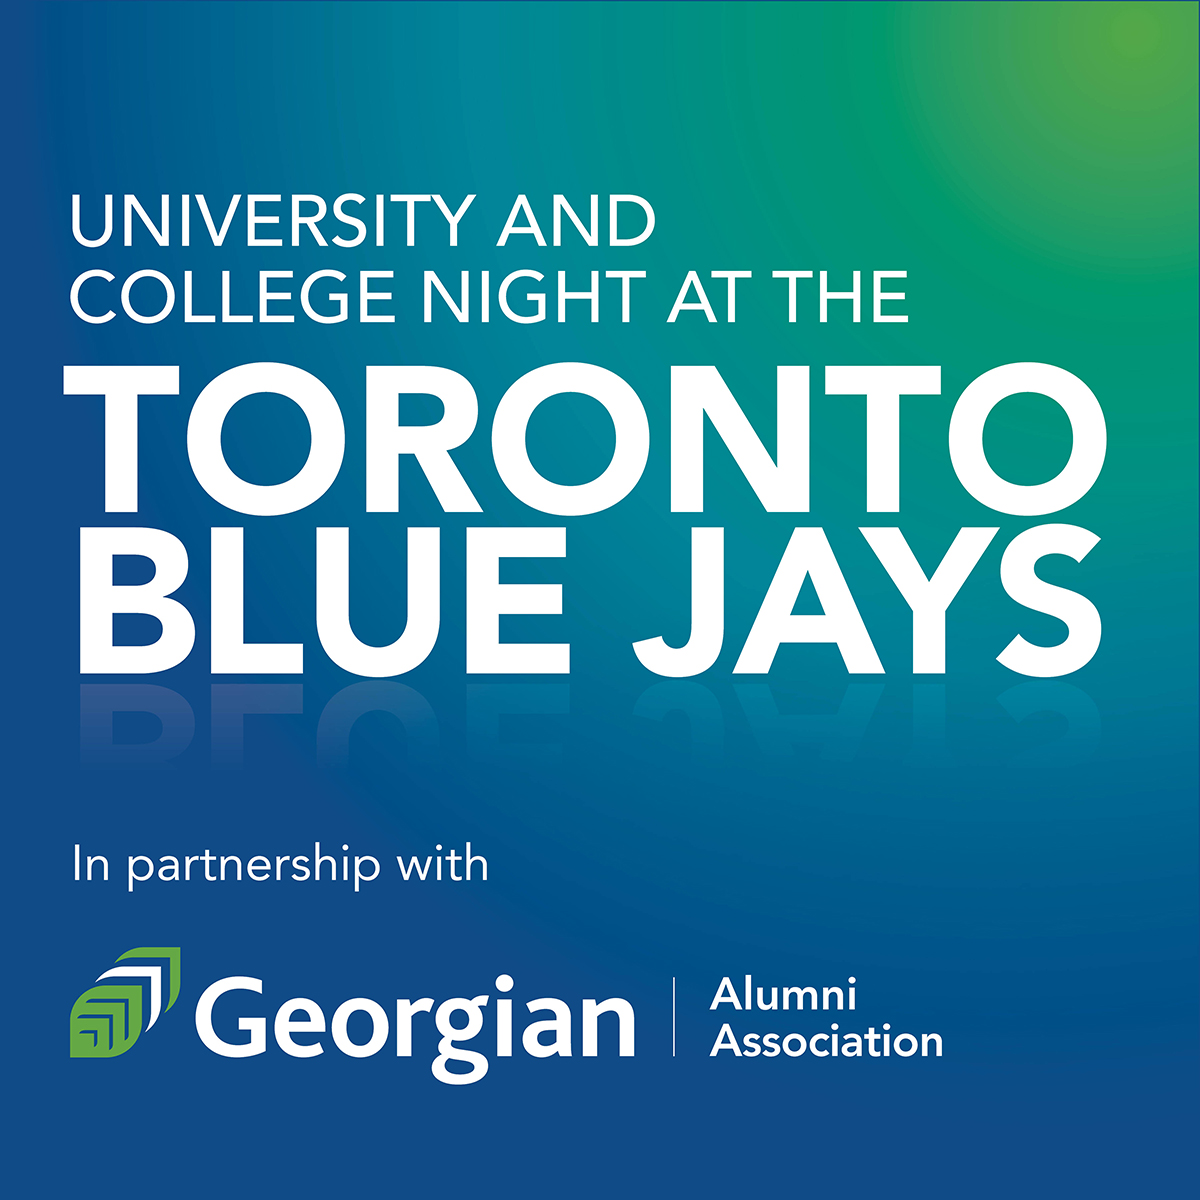 University and College Night at the Toronto Blue Jays in partnership with Georgian College Alumni Association (logo)